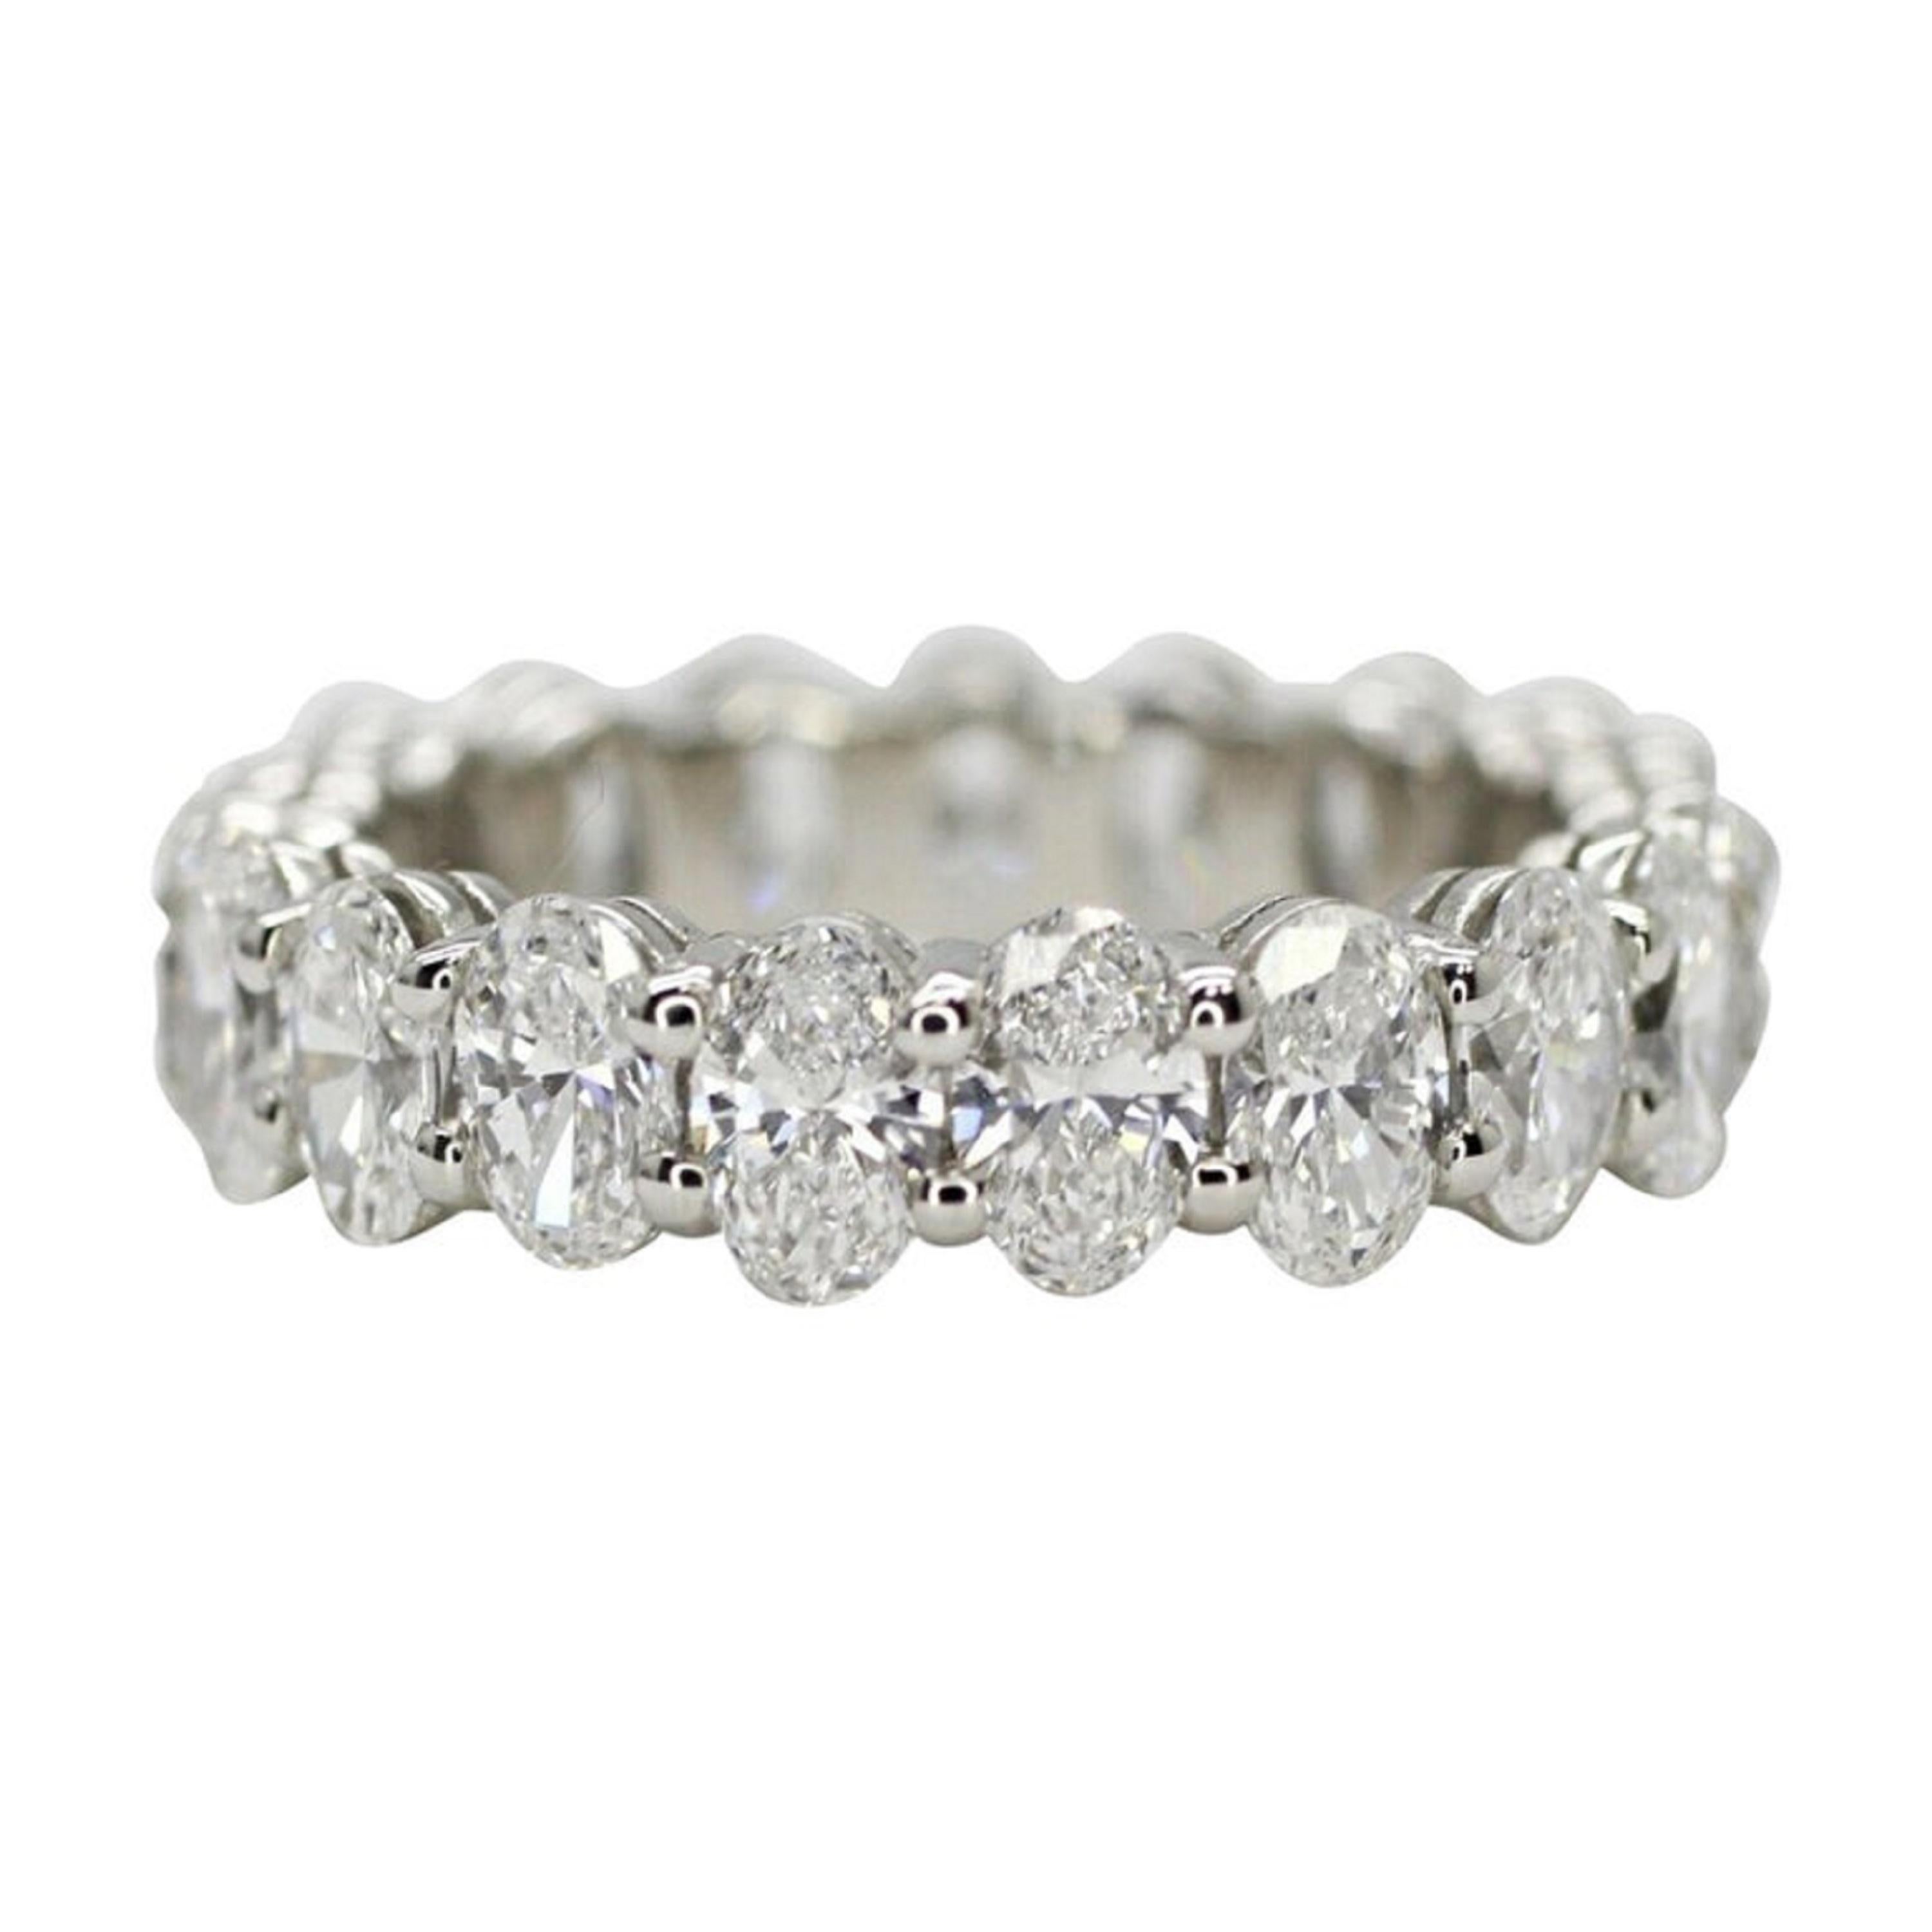 This beautiful Layout of oval cut diamonds for an eternity ring is just waiting for you to decide on your ring.  Featuring 19 oval cut diamonds set in 14k white gold weighing 3.35carats. These spectacular diamonds are G in color, VS1-2  clarity.